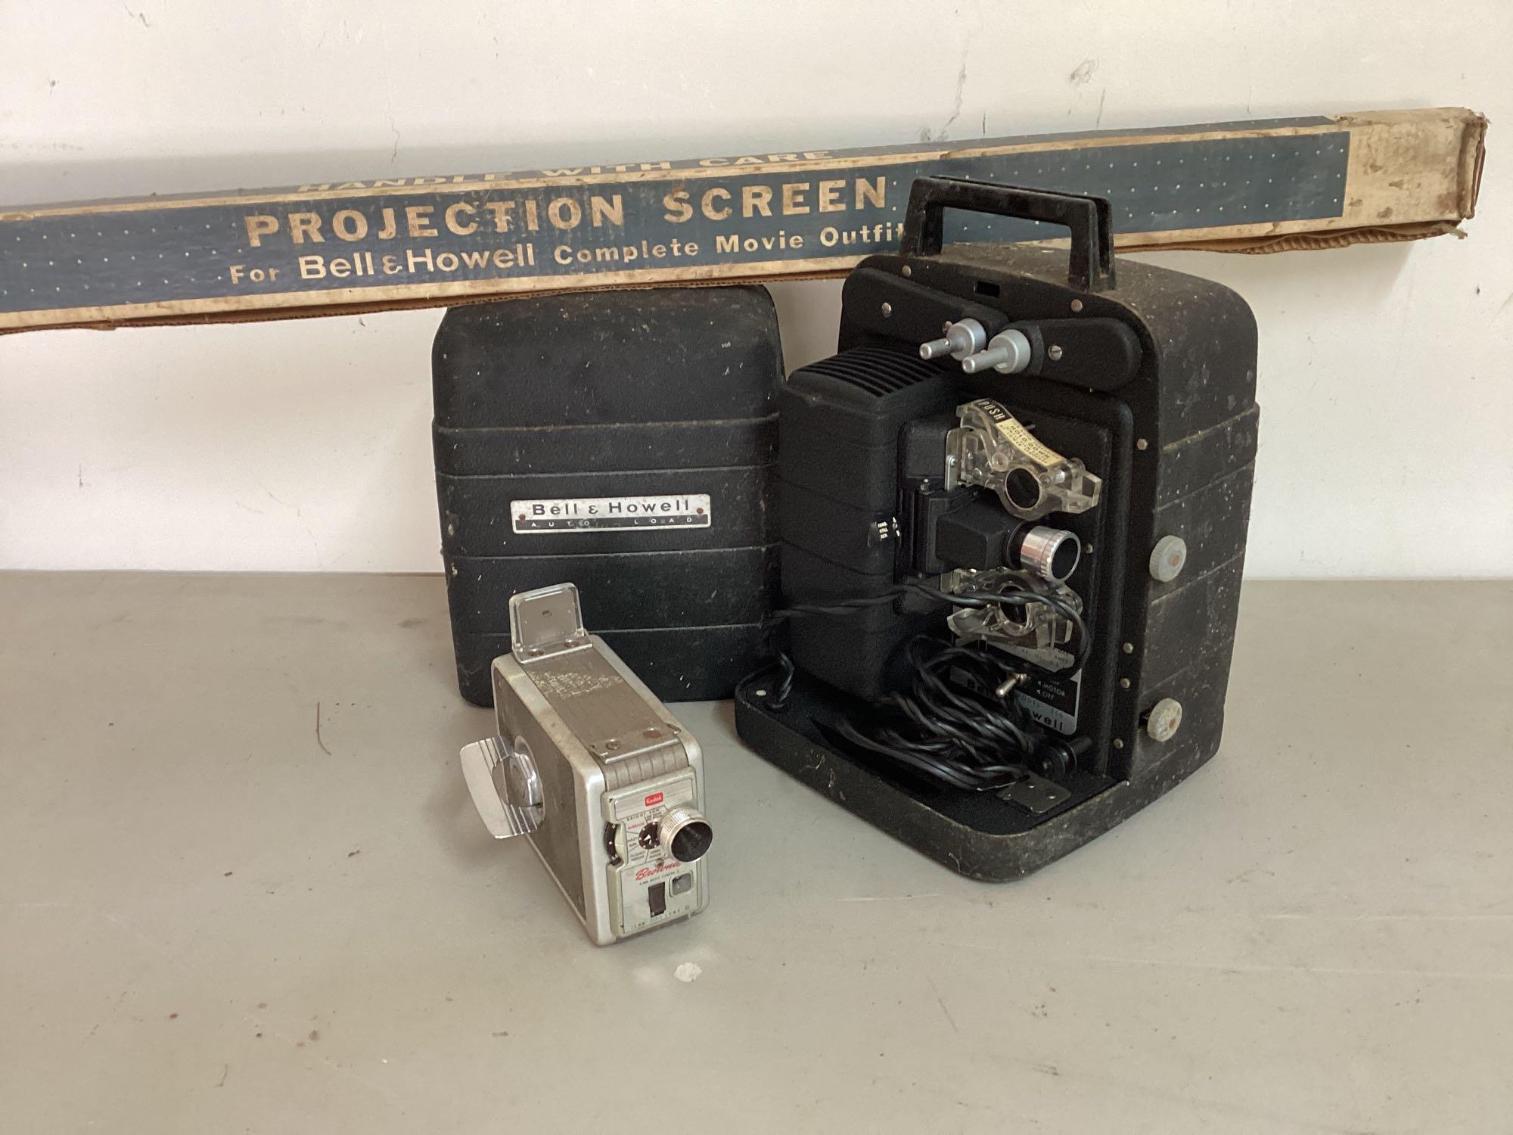 Image for Brownie 13mm Movie Camera with Projector and Screen